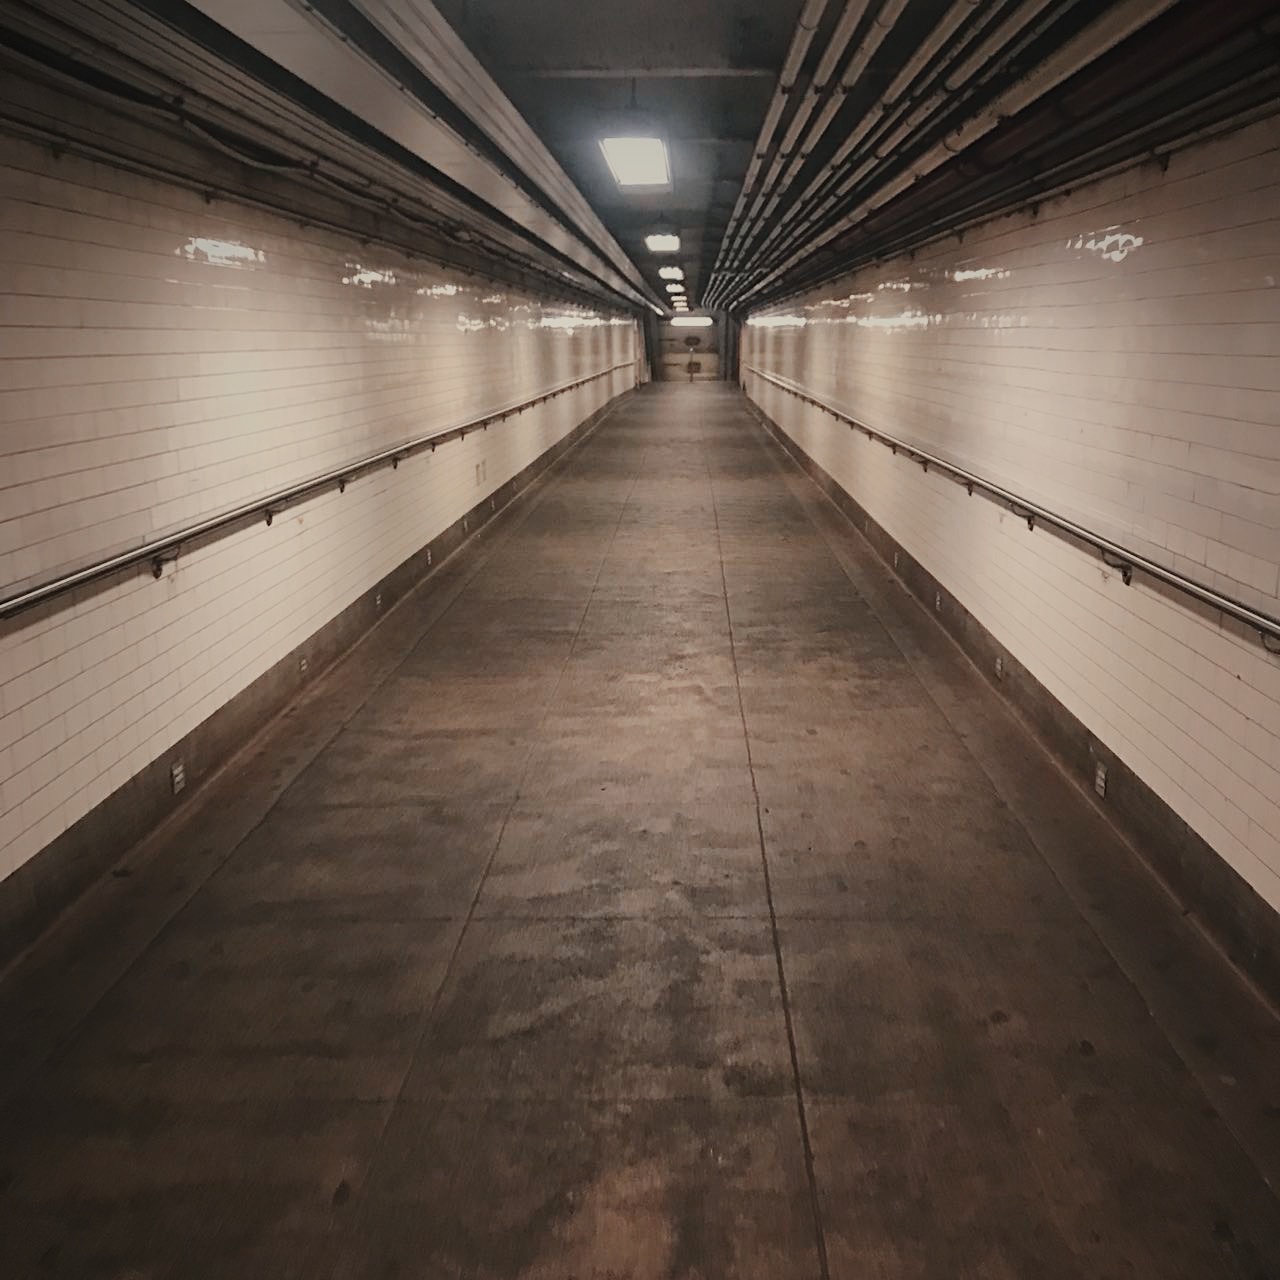 “ The subway station was quite empty today, very peaceful.”